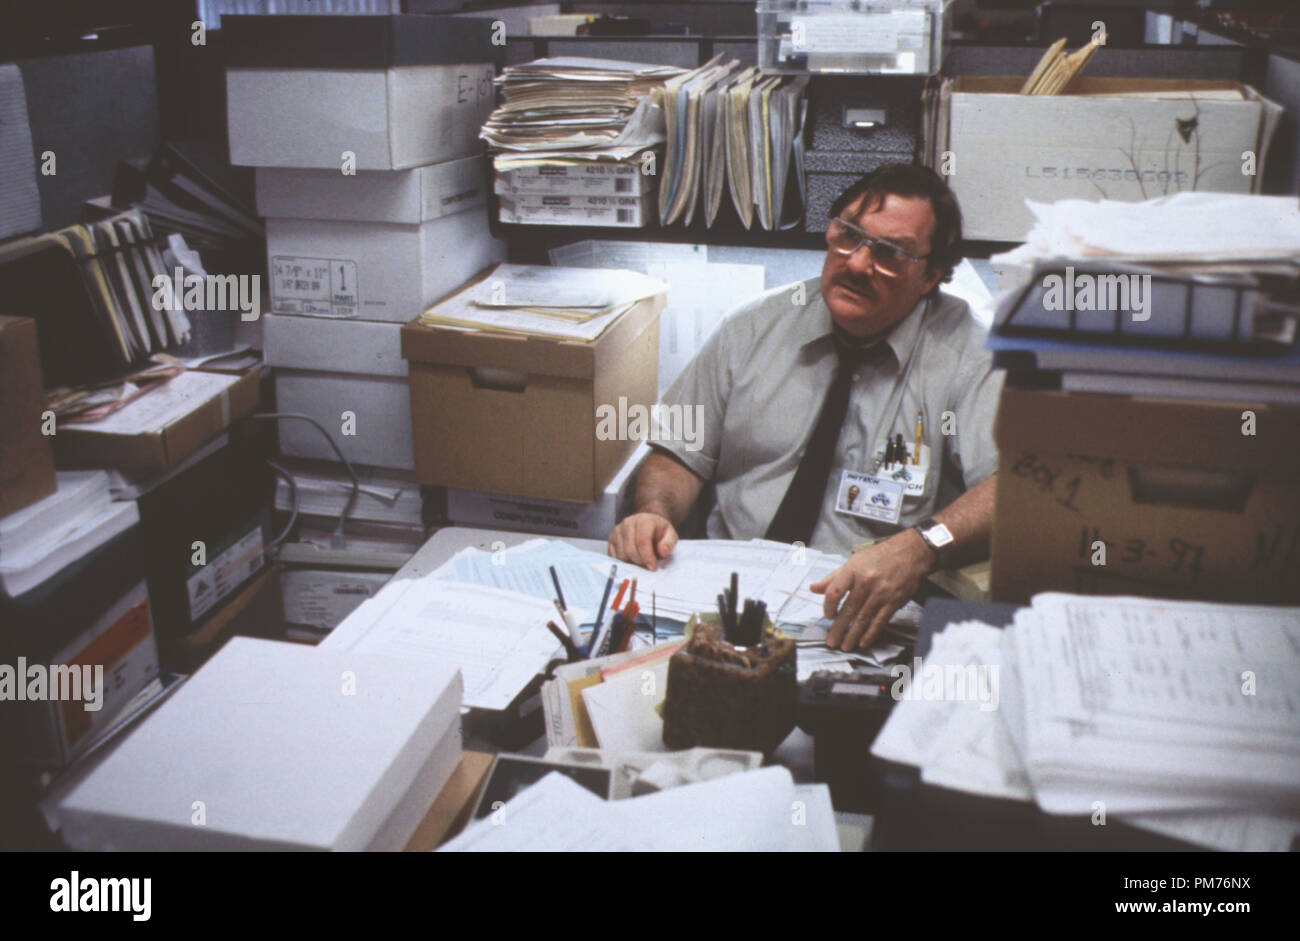 Film Still / Publicity Still from 'Office Space' Stephen Root © 1999 20th Century Fox Photo Credit: Van Redin   File Reference # 30973504THA  For Editorial Use Only -  All Rights Reserved Stock Photo